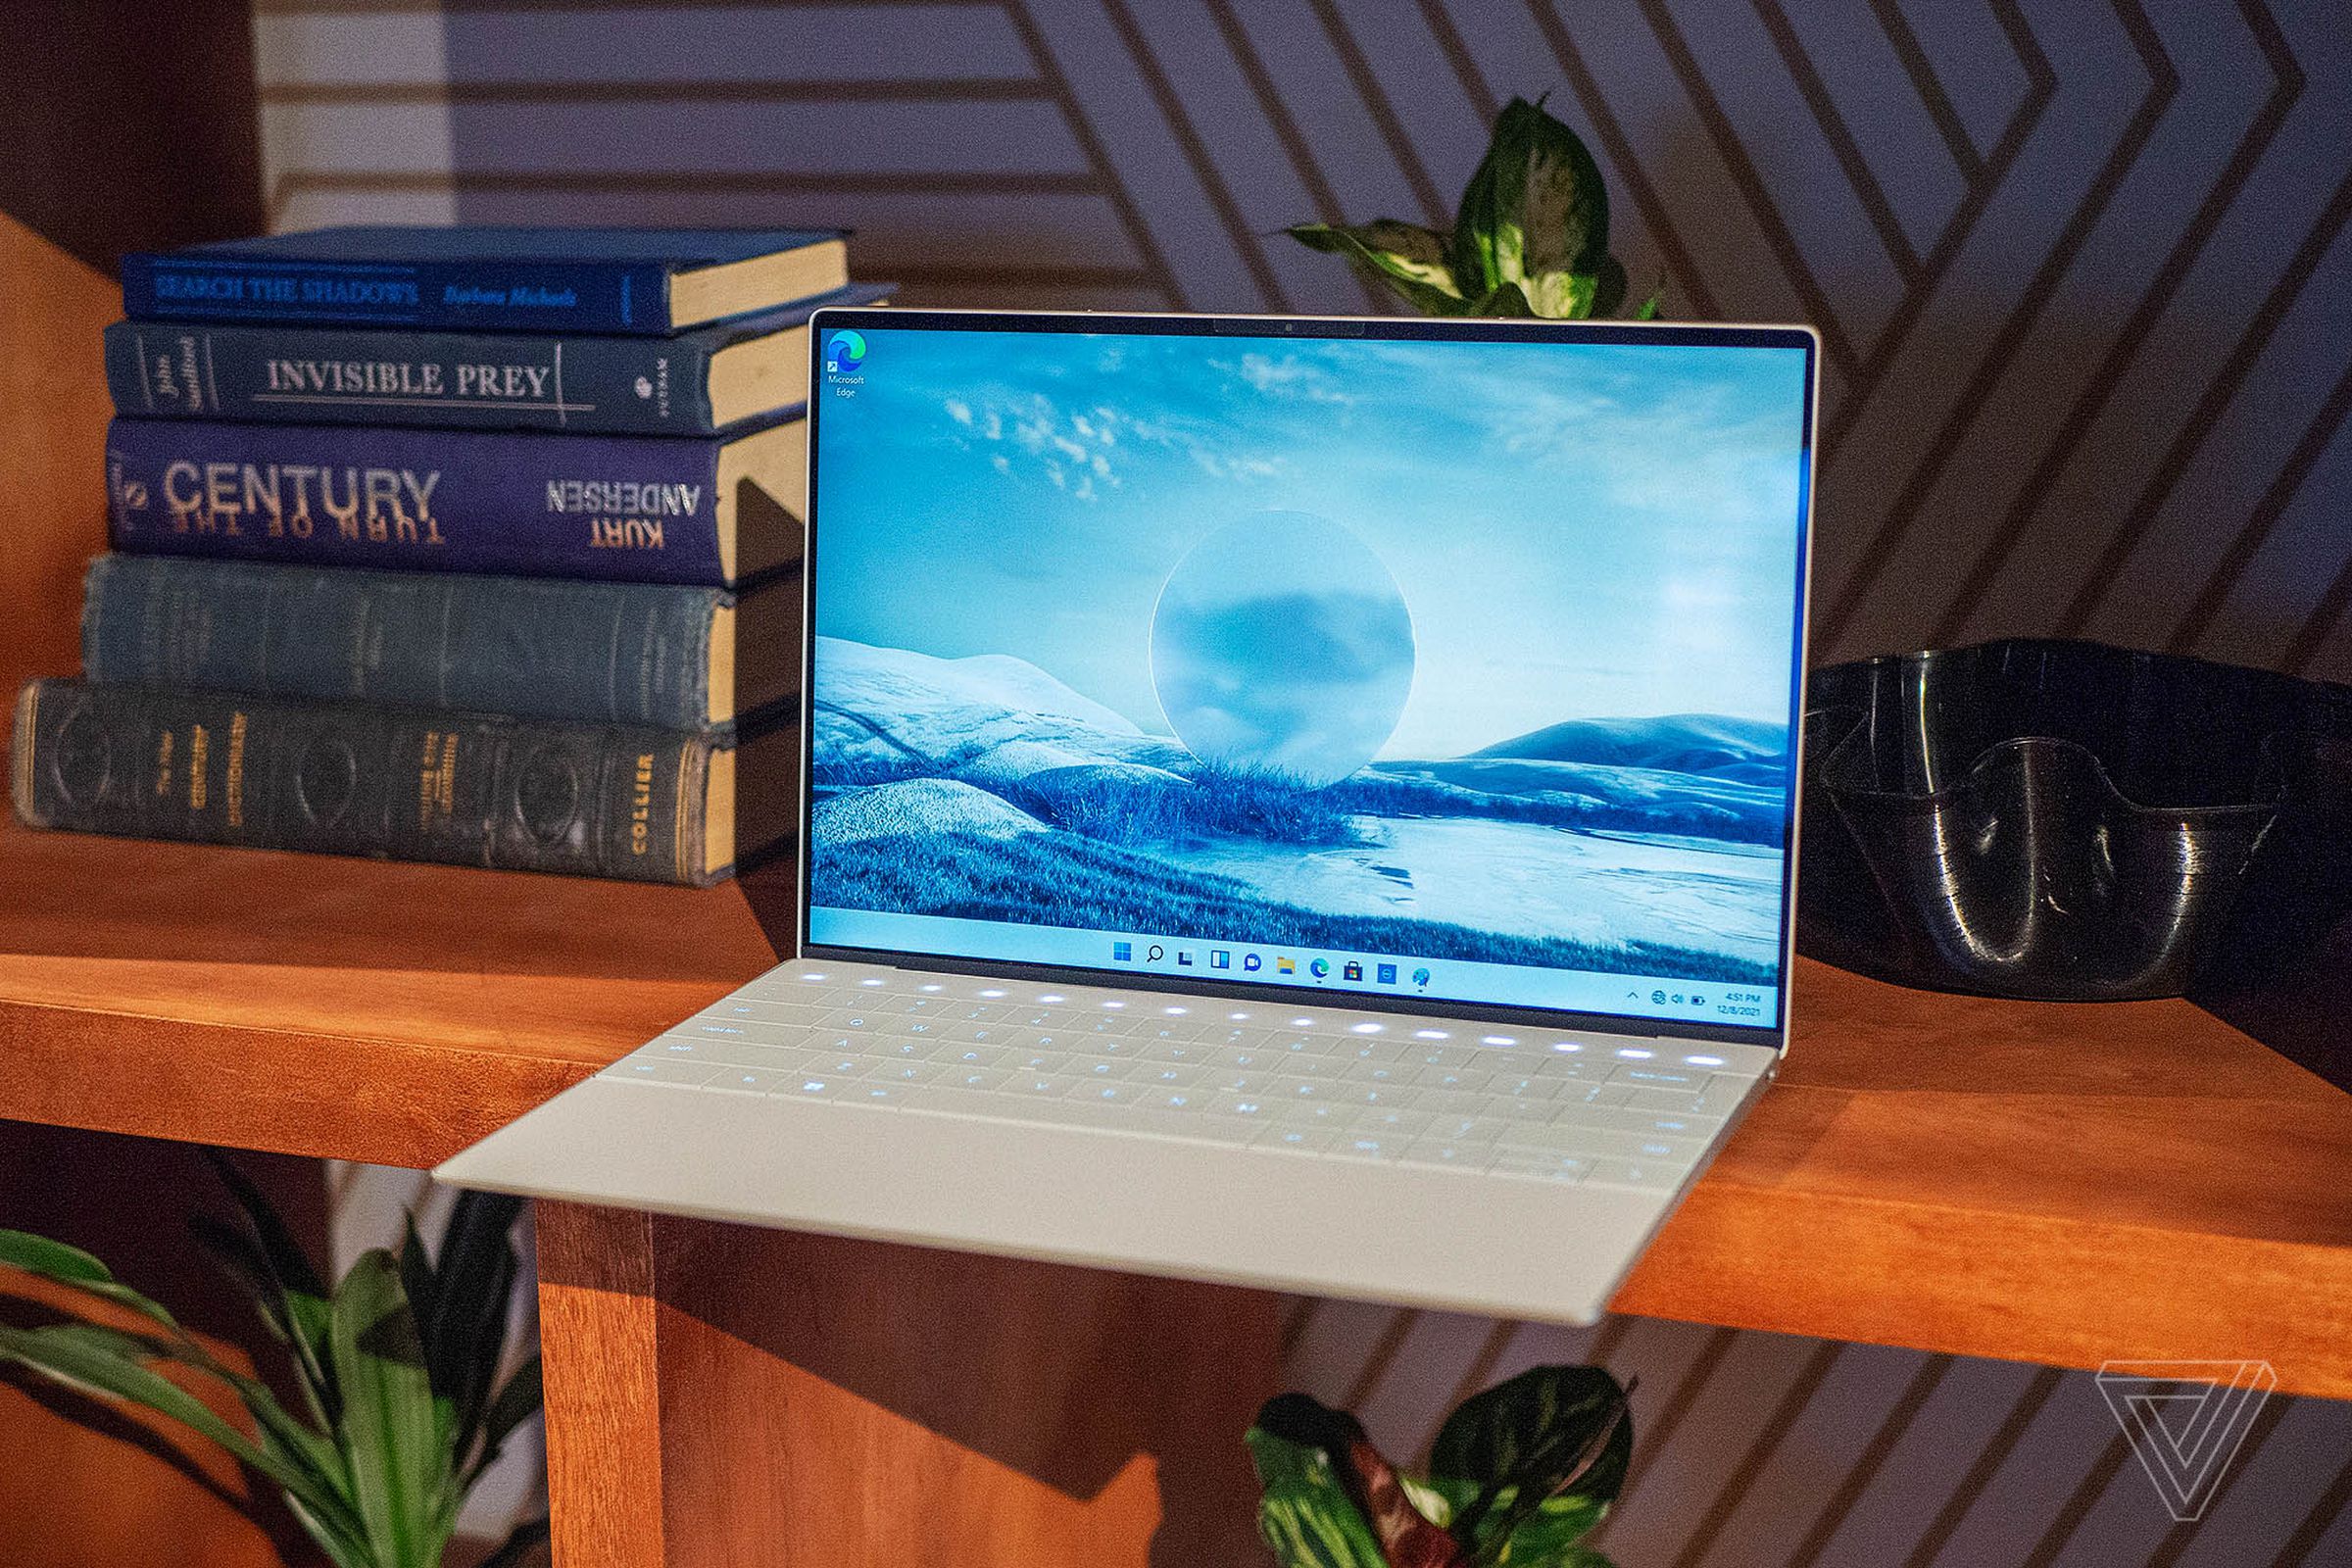 The Dell XPS 13 Plus open and angled to the left on a shelf. The screen displays a blue arctic setting. A pile of books is to its right.